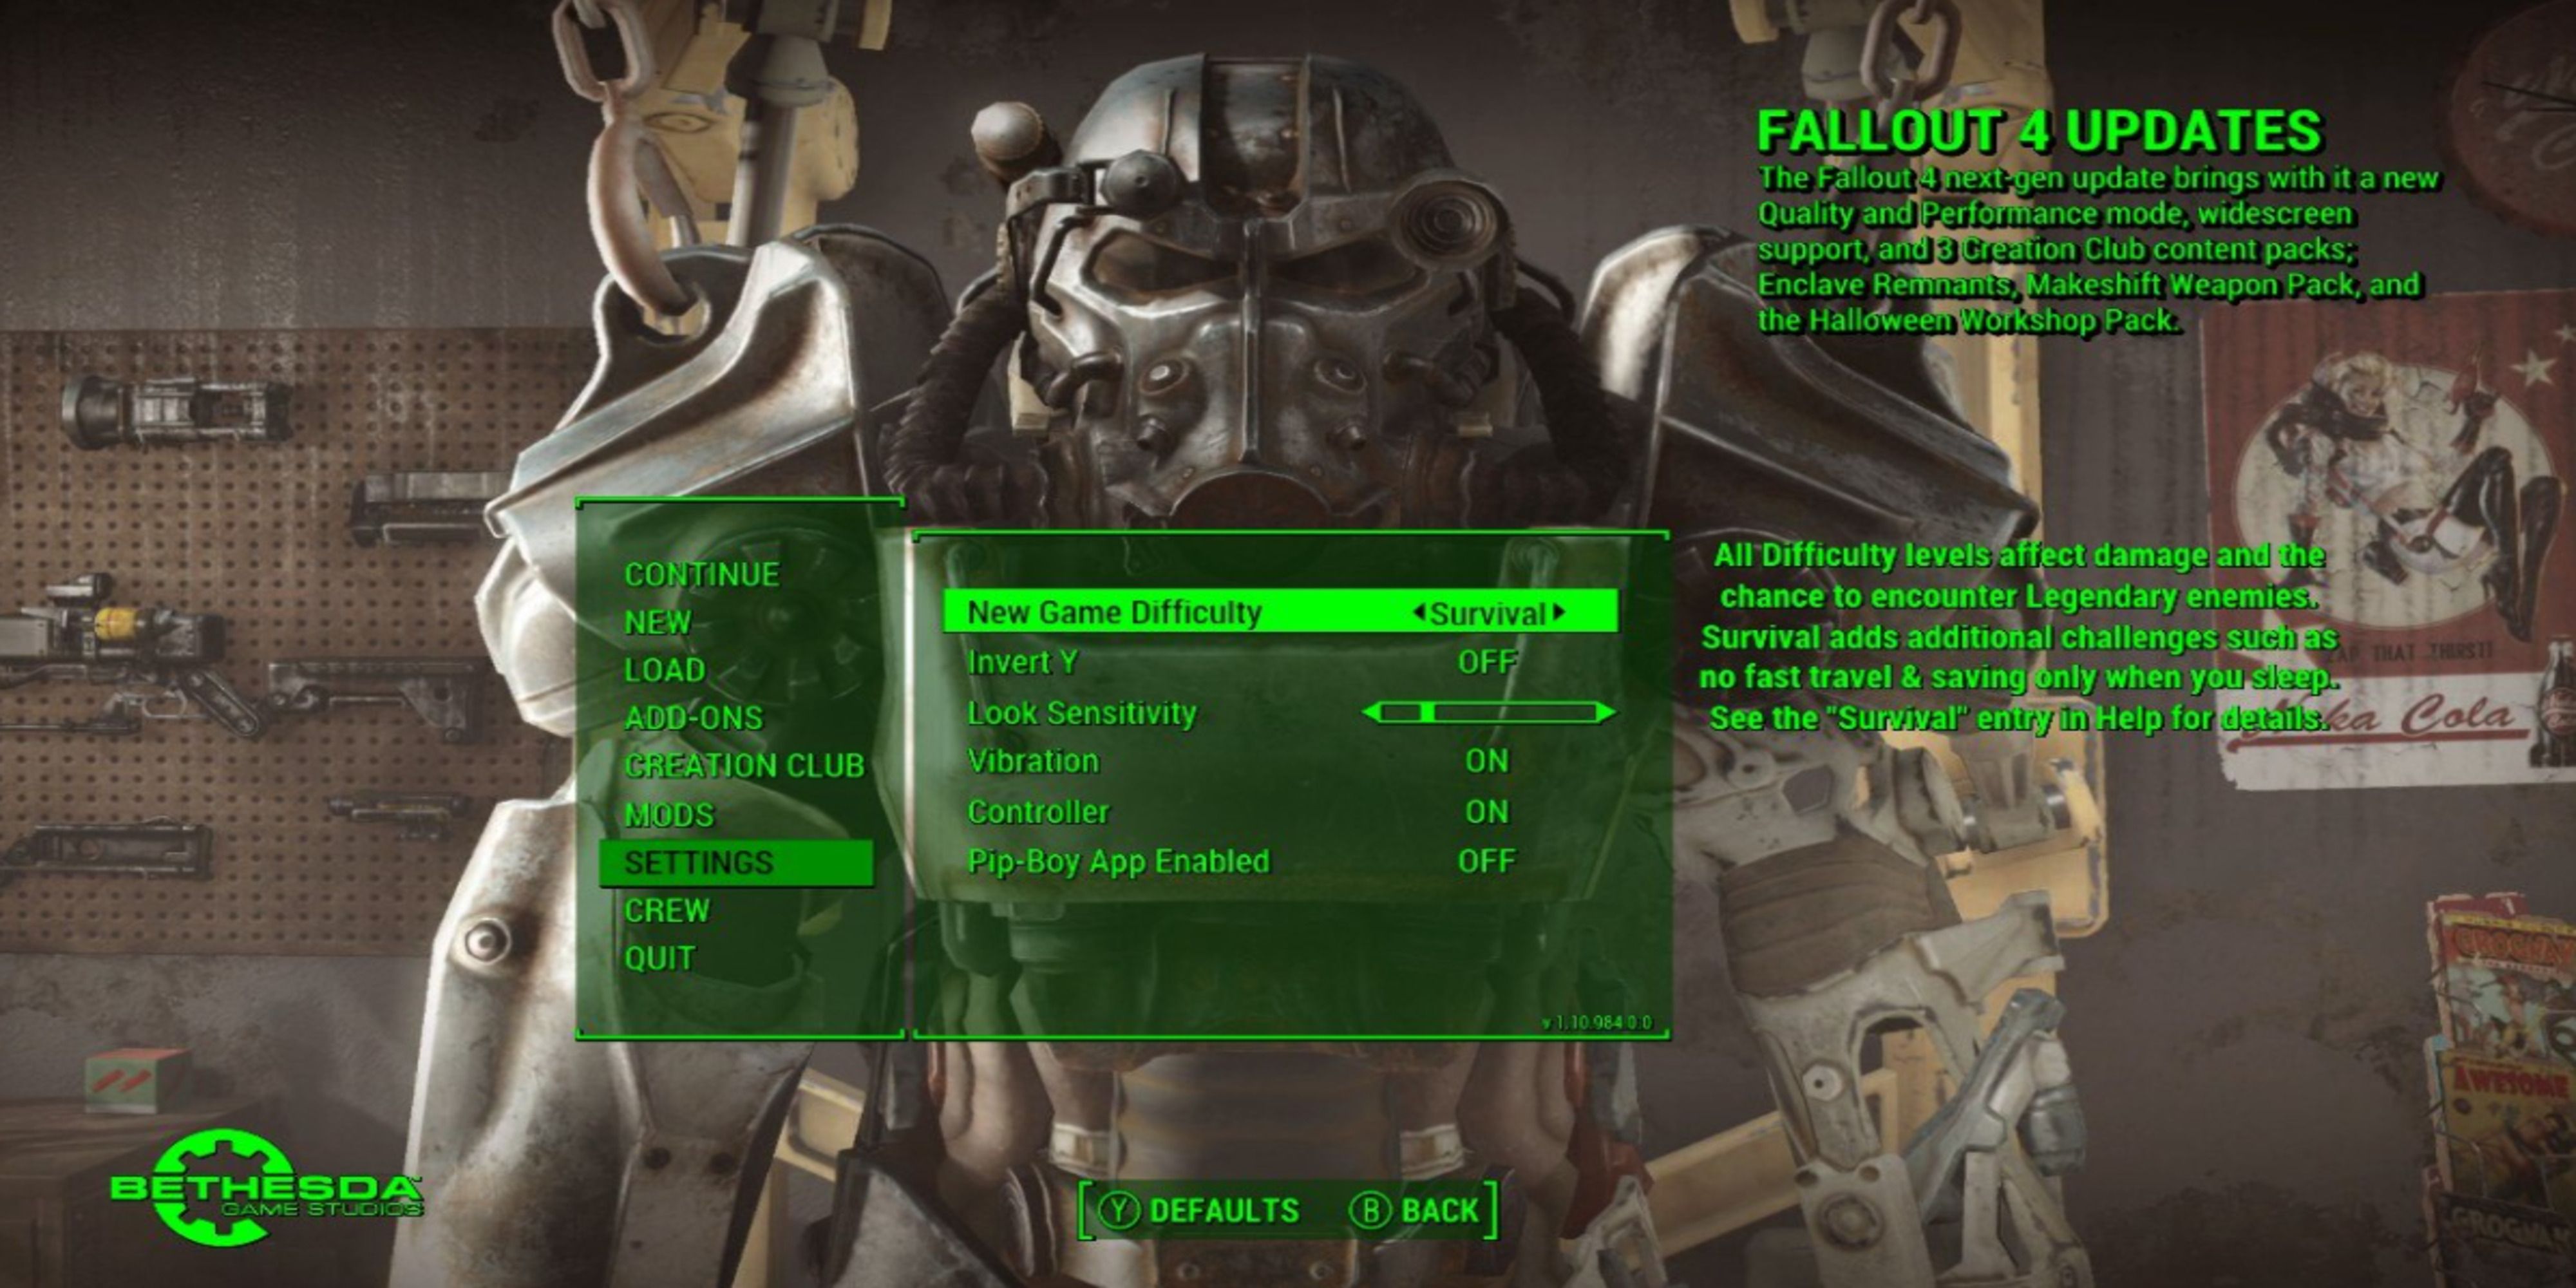 Picking a difficulty when starting a new game in Fallout 4